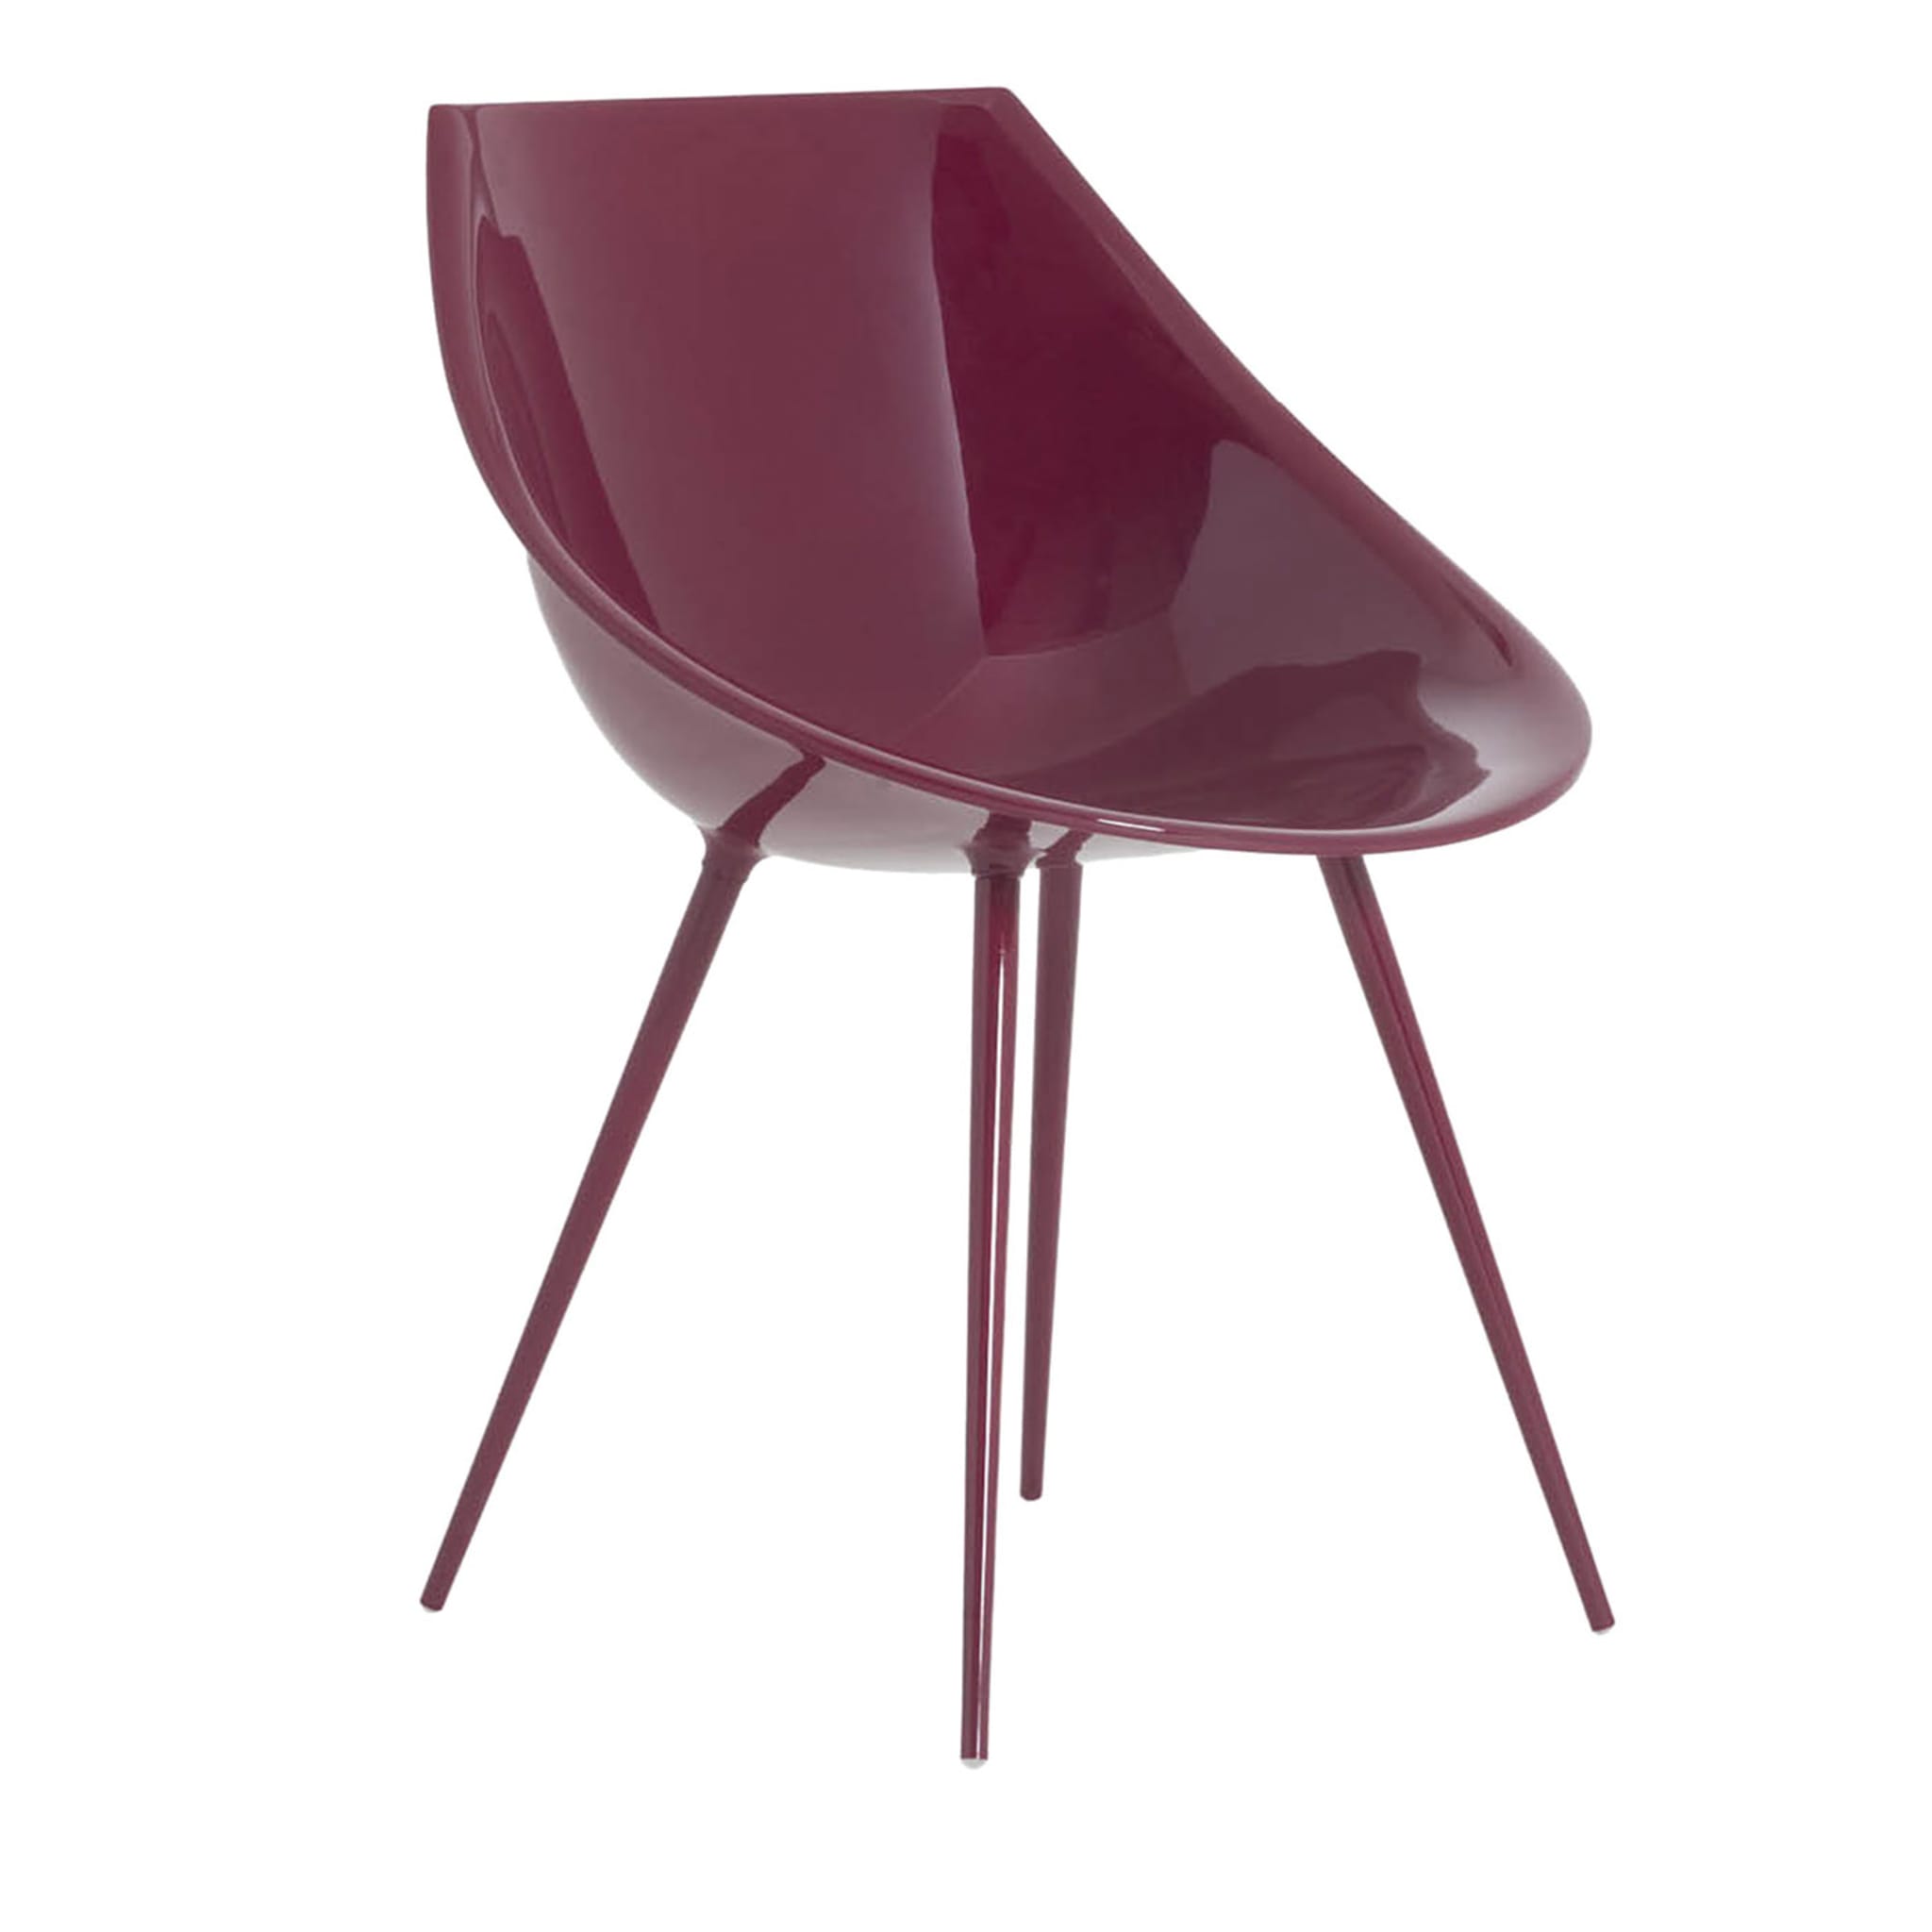 Lago' Wine-Red Chair by Philippe Starck - Main view